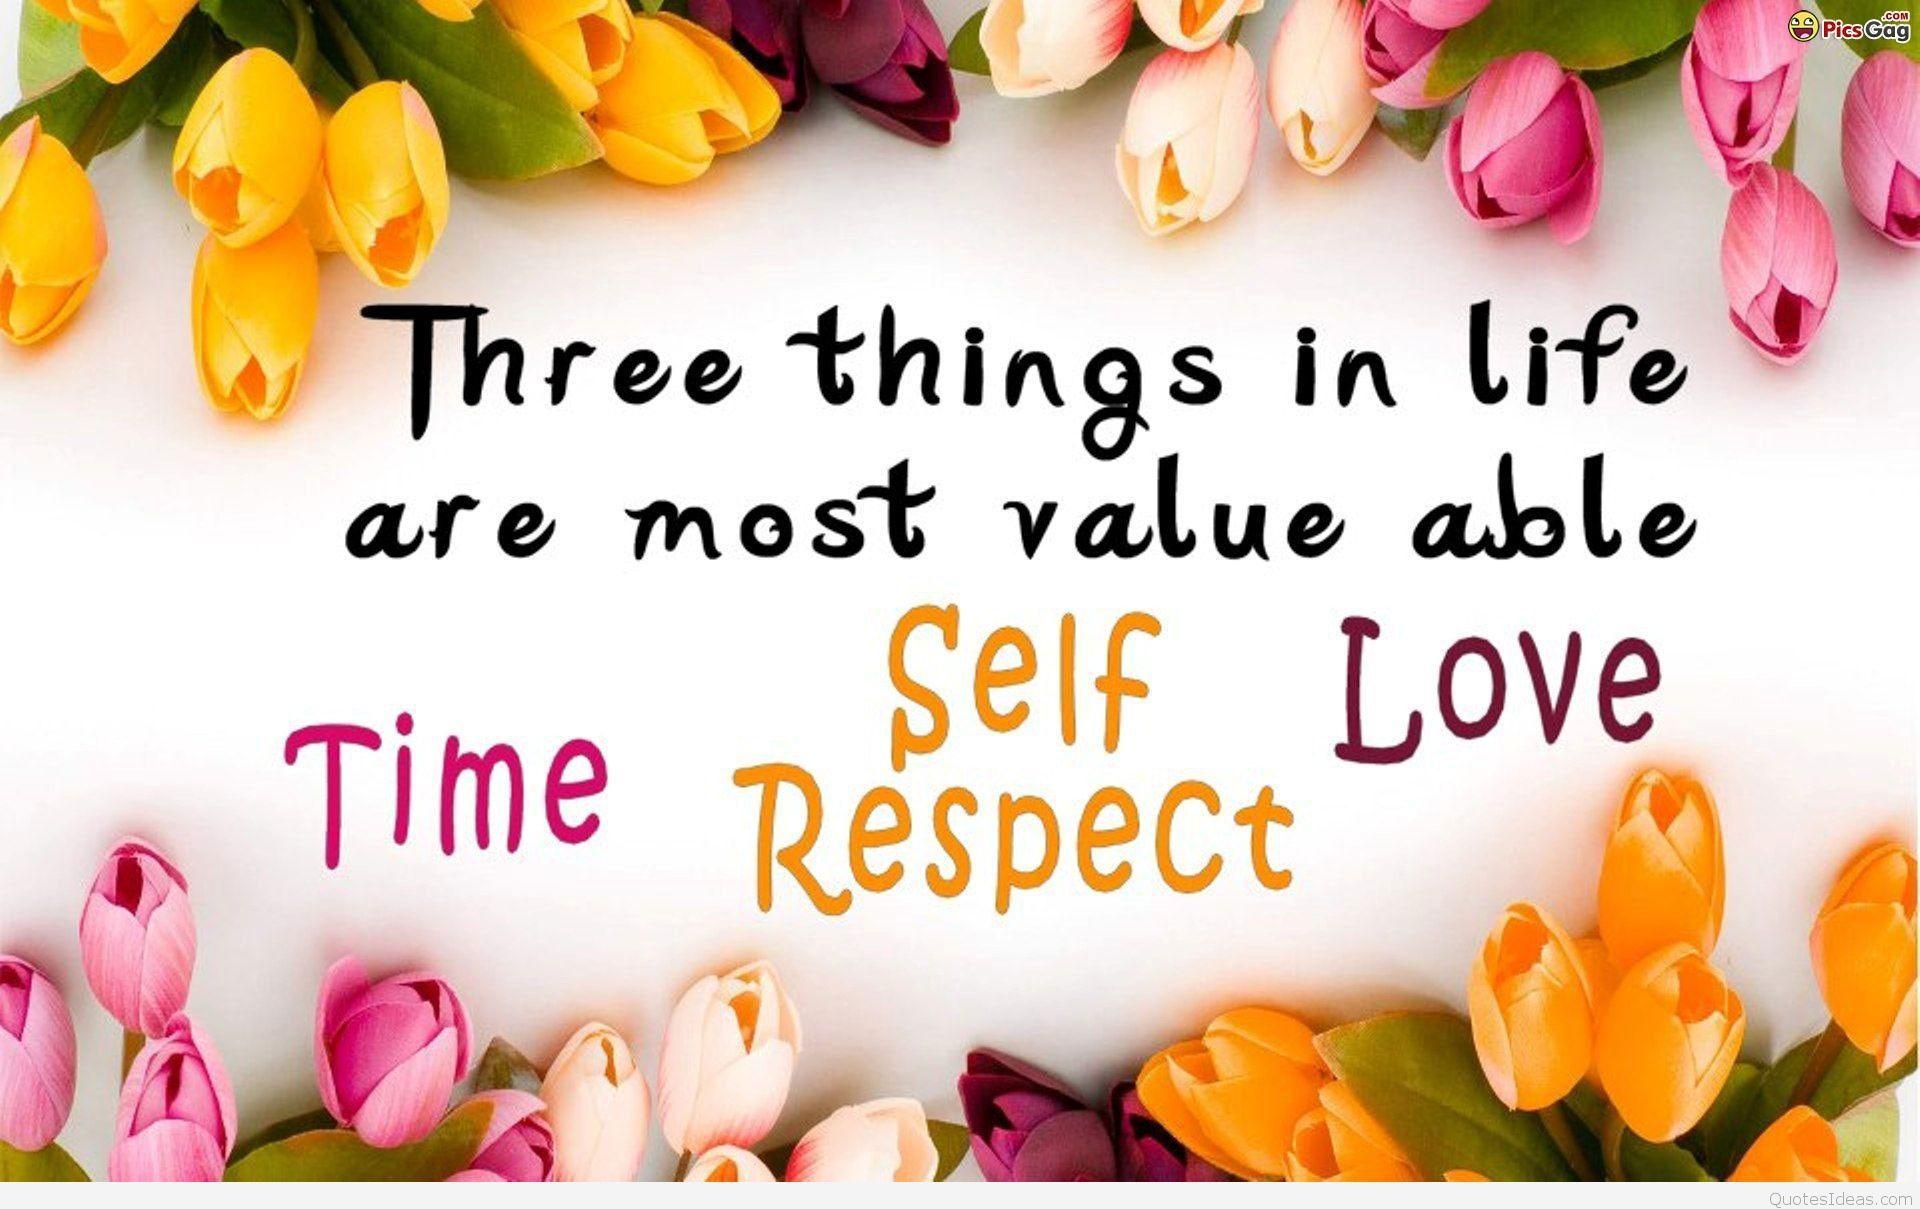 Three things in life quote wallpaper hd